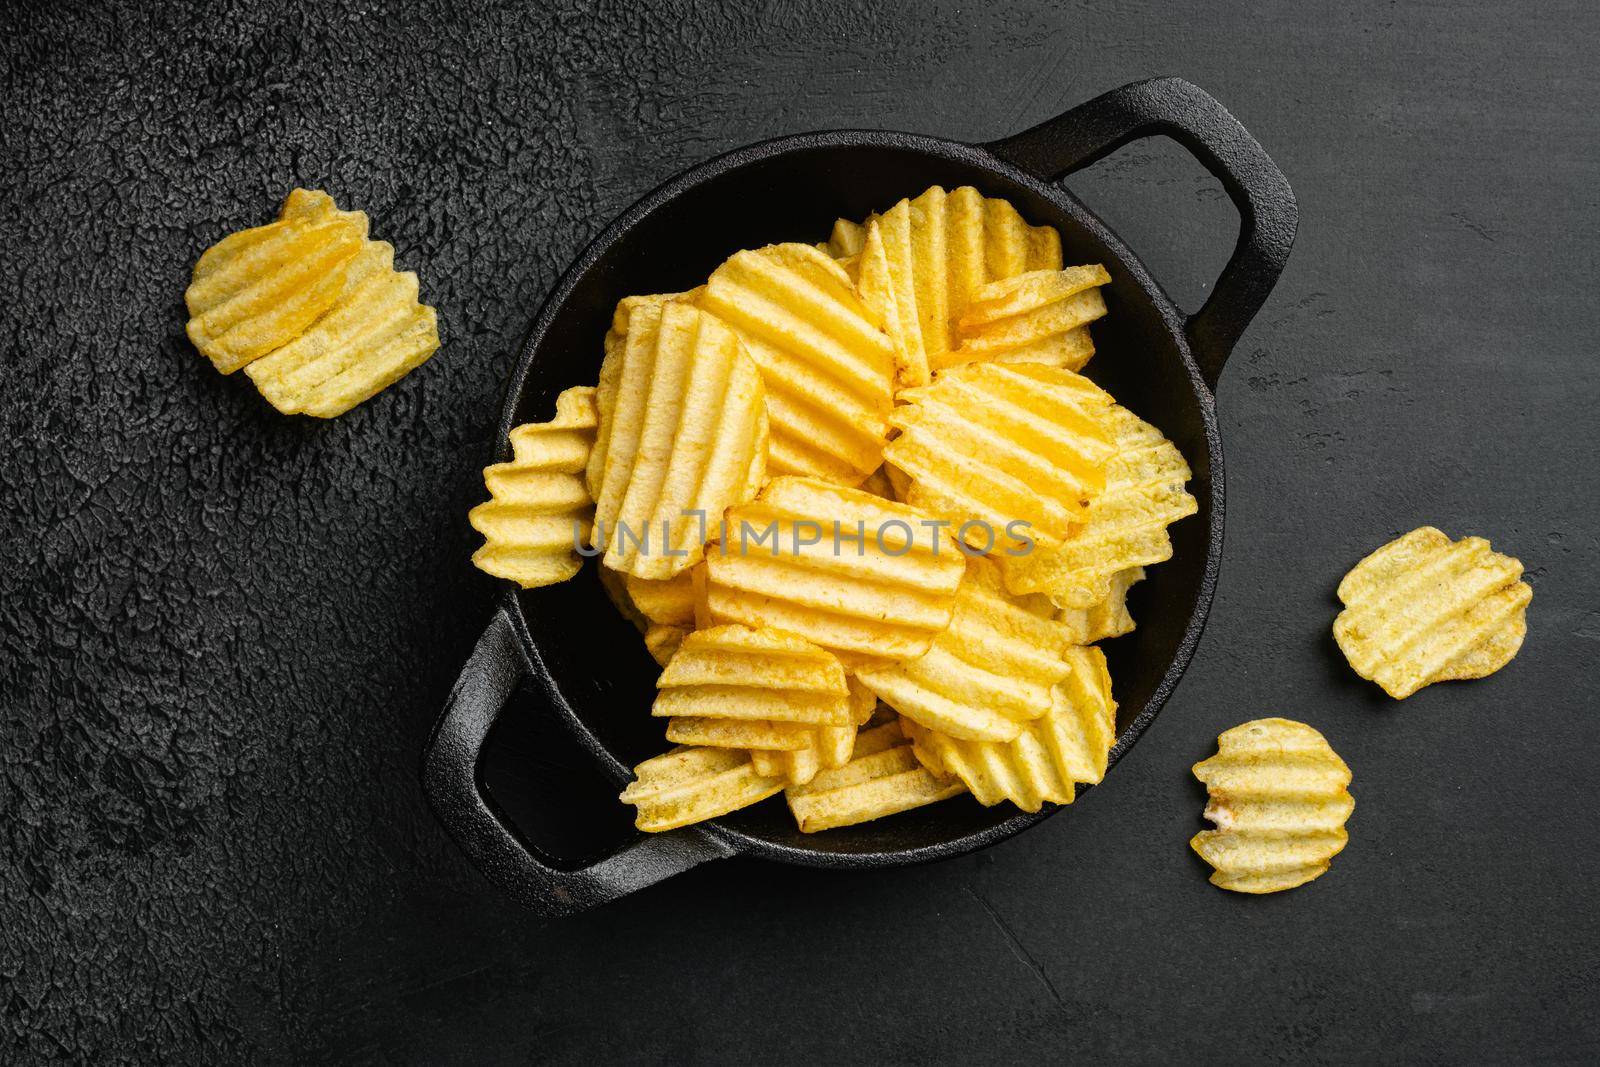 Wavy Ranch Flavored Potato Chips, on black dark stone table background, top view flat lay